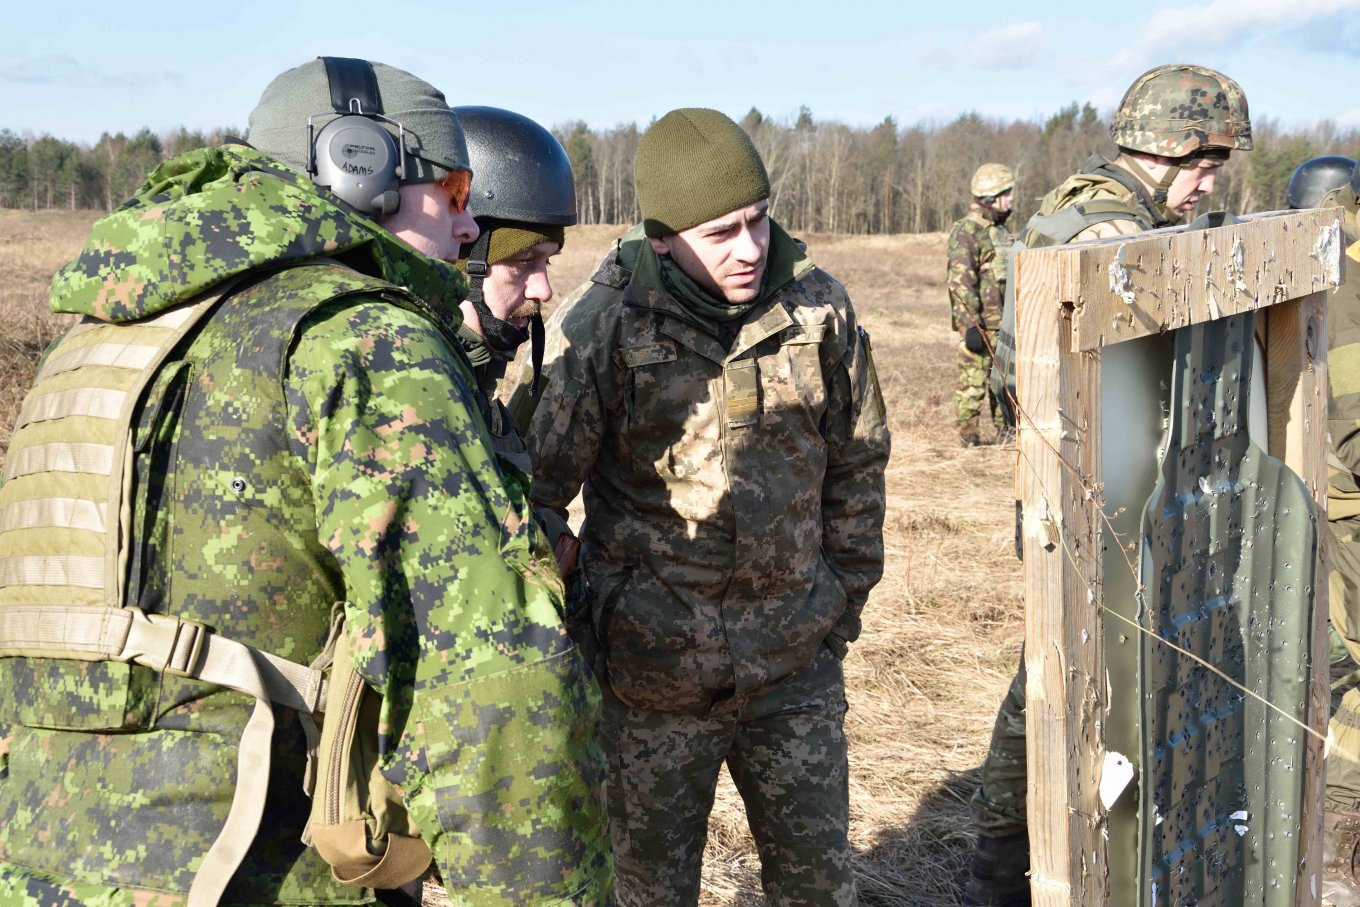 Canadian special forces operators deployed in Ukraine, Defense Express